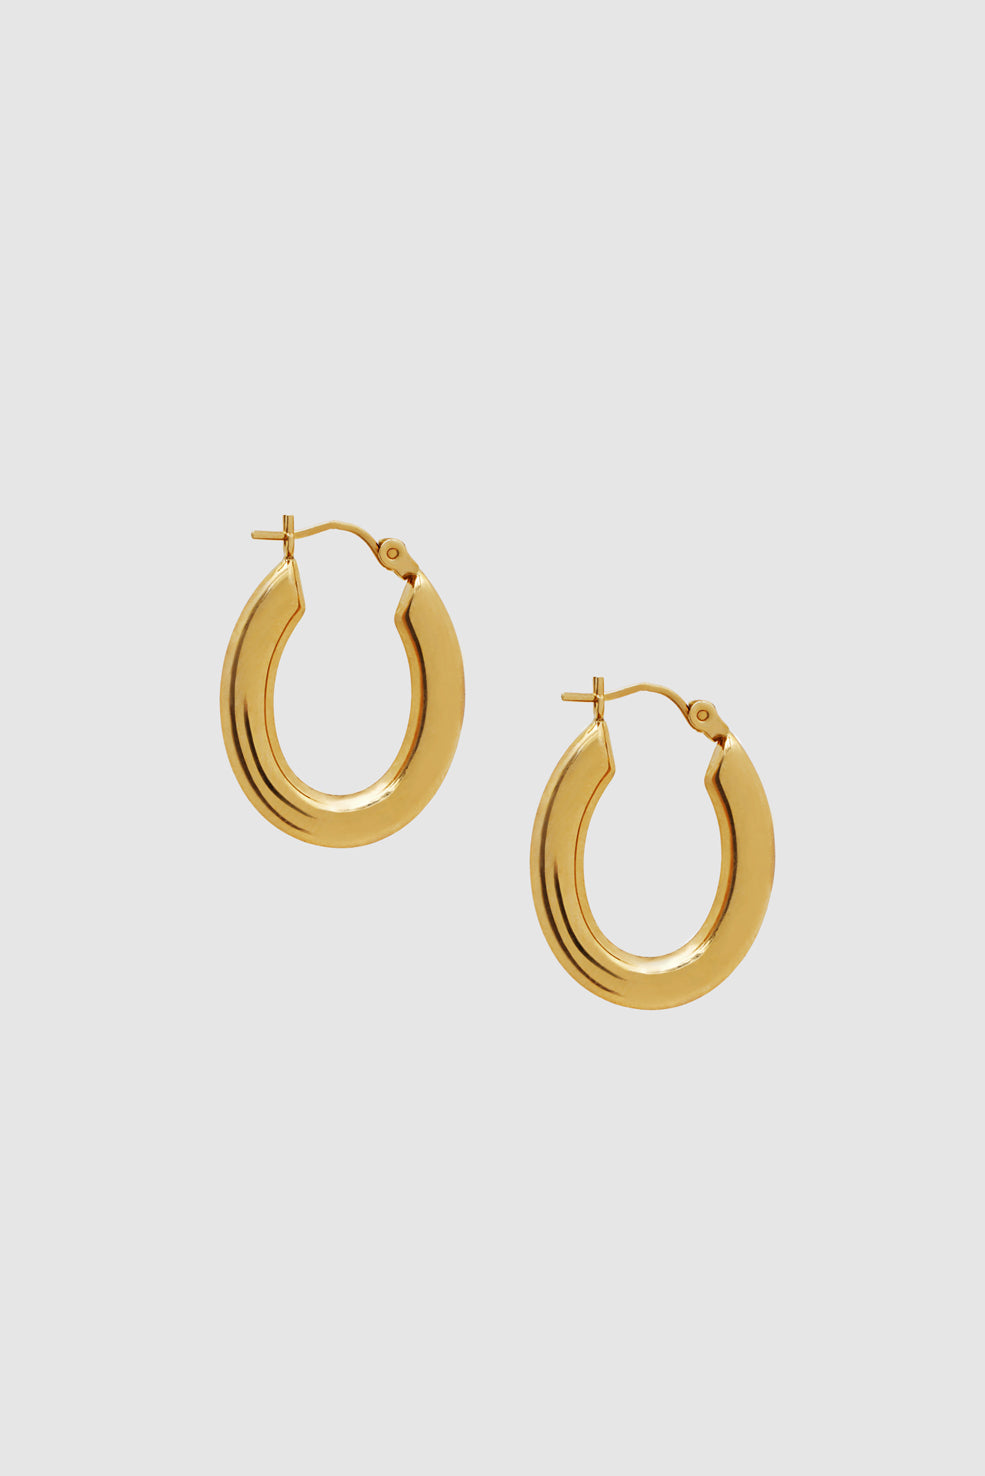 ANINE BING Small Tubular Oval Hoop Earrings - 14K Gold - Front View